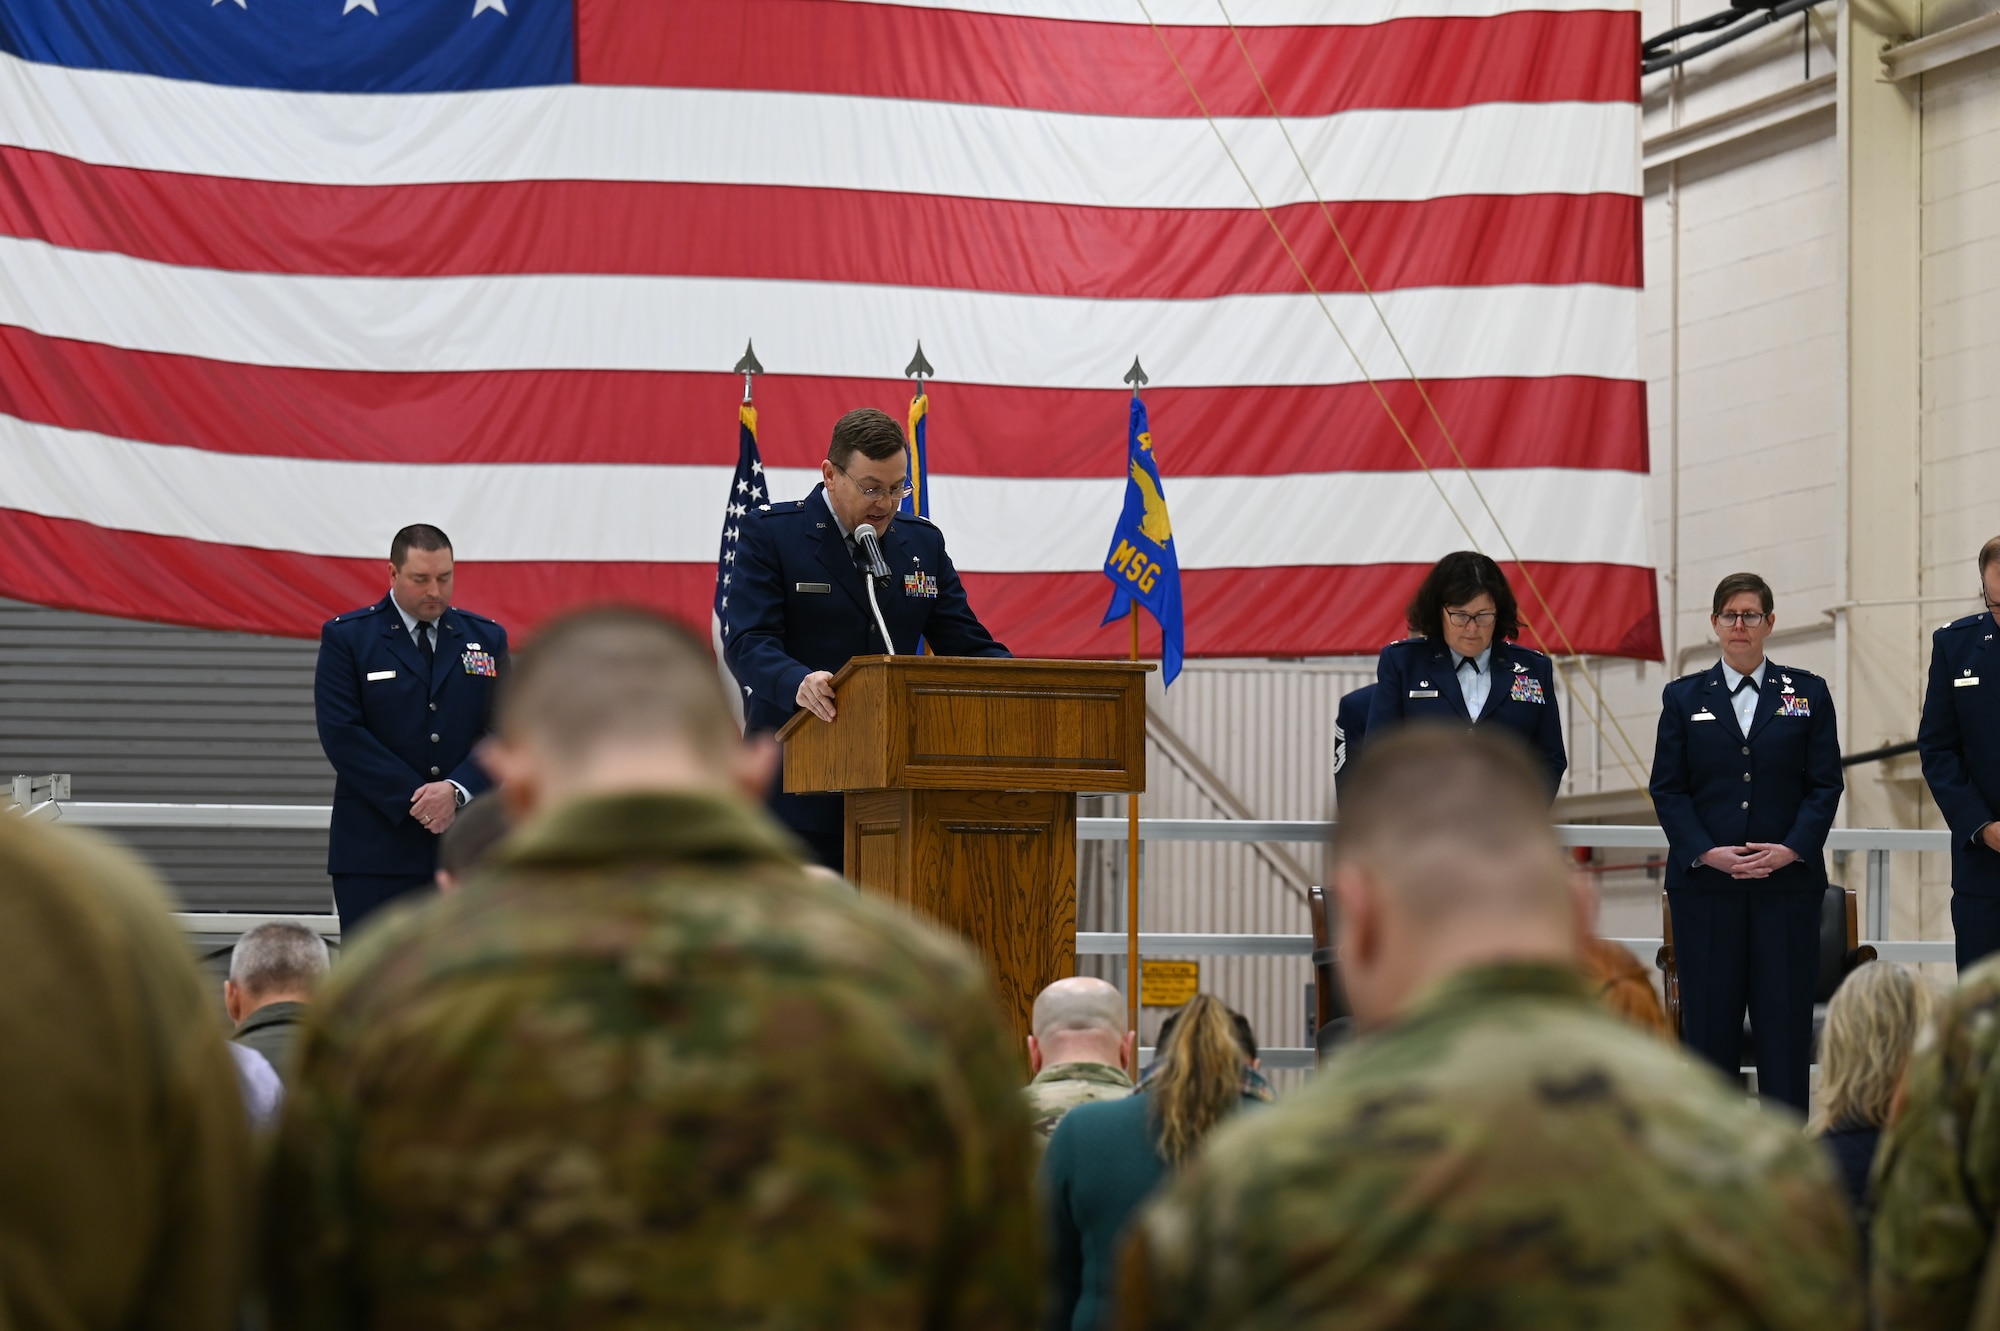 Lt. Col. Alex Jack, 434th Air Refueling Wing chaplain, leads the invocation during a change of command ceremony at Grissom Air Reserve Base. Jack is delivering the remarks at a podium on a stage with a large American flag in the background and several uniformed service members on stage behind him.